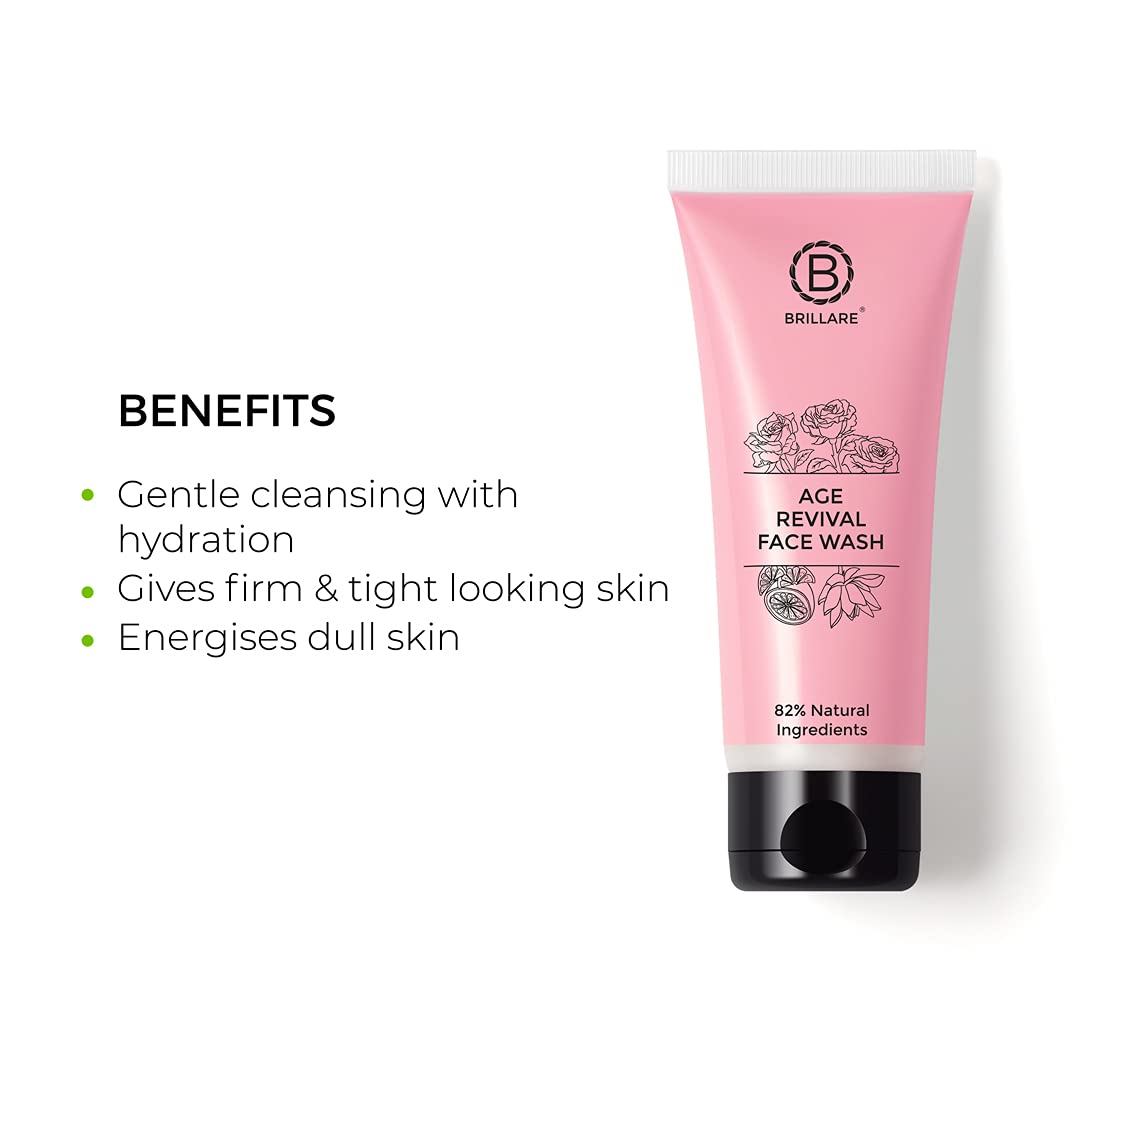 Age Revival Face Wash For Ageing Skin